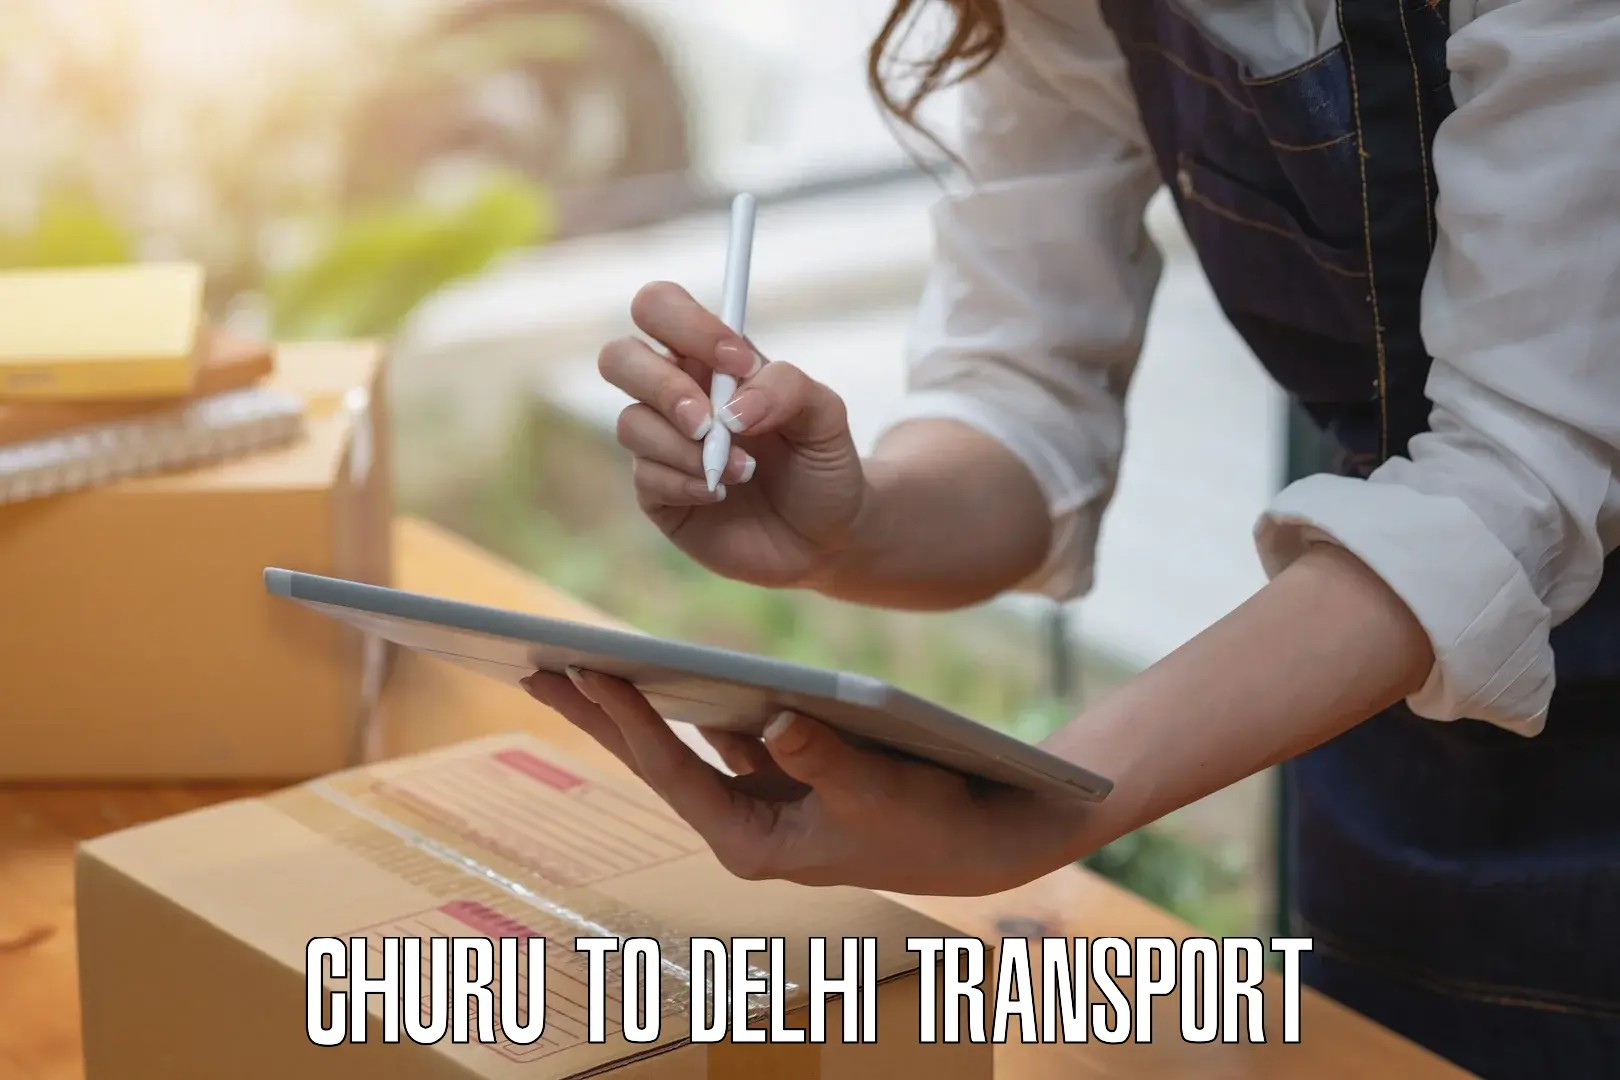 Transport bike from one state to another Churu to Delhi